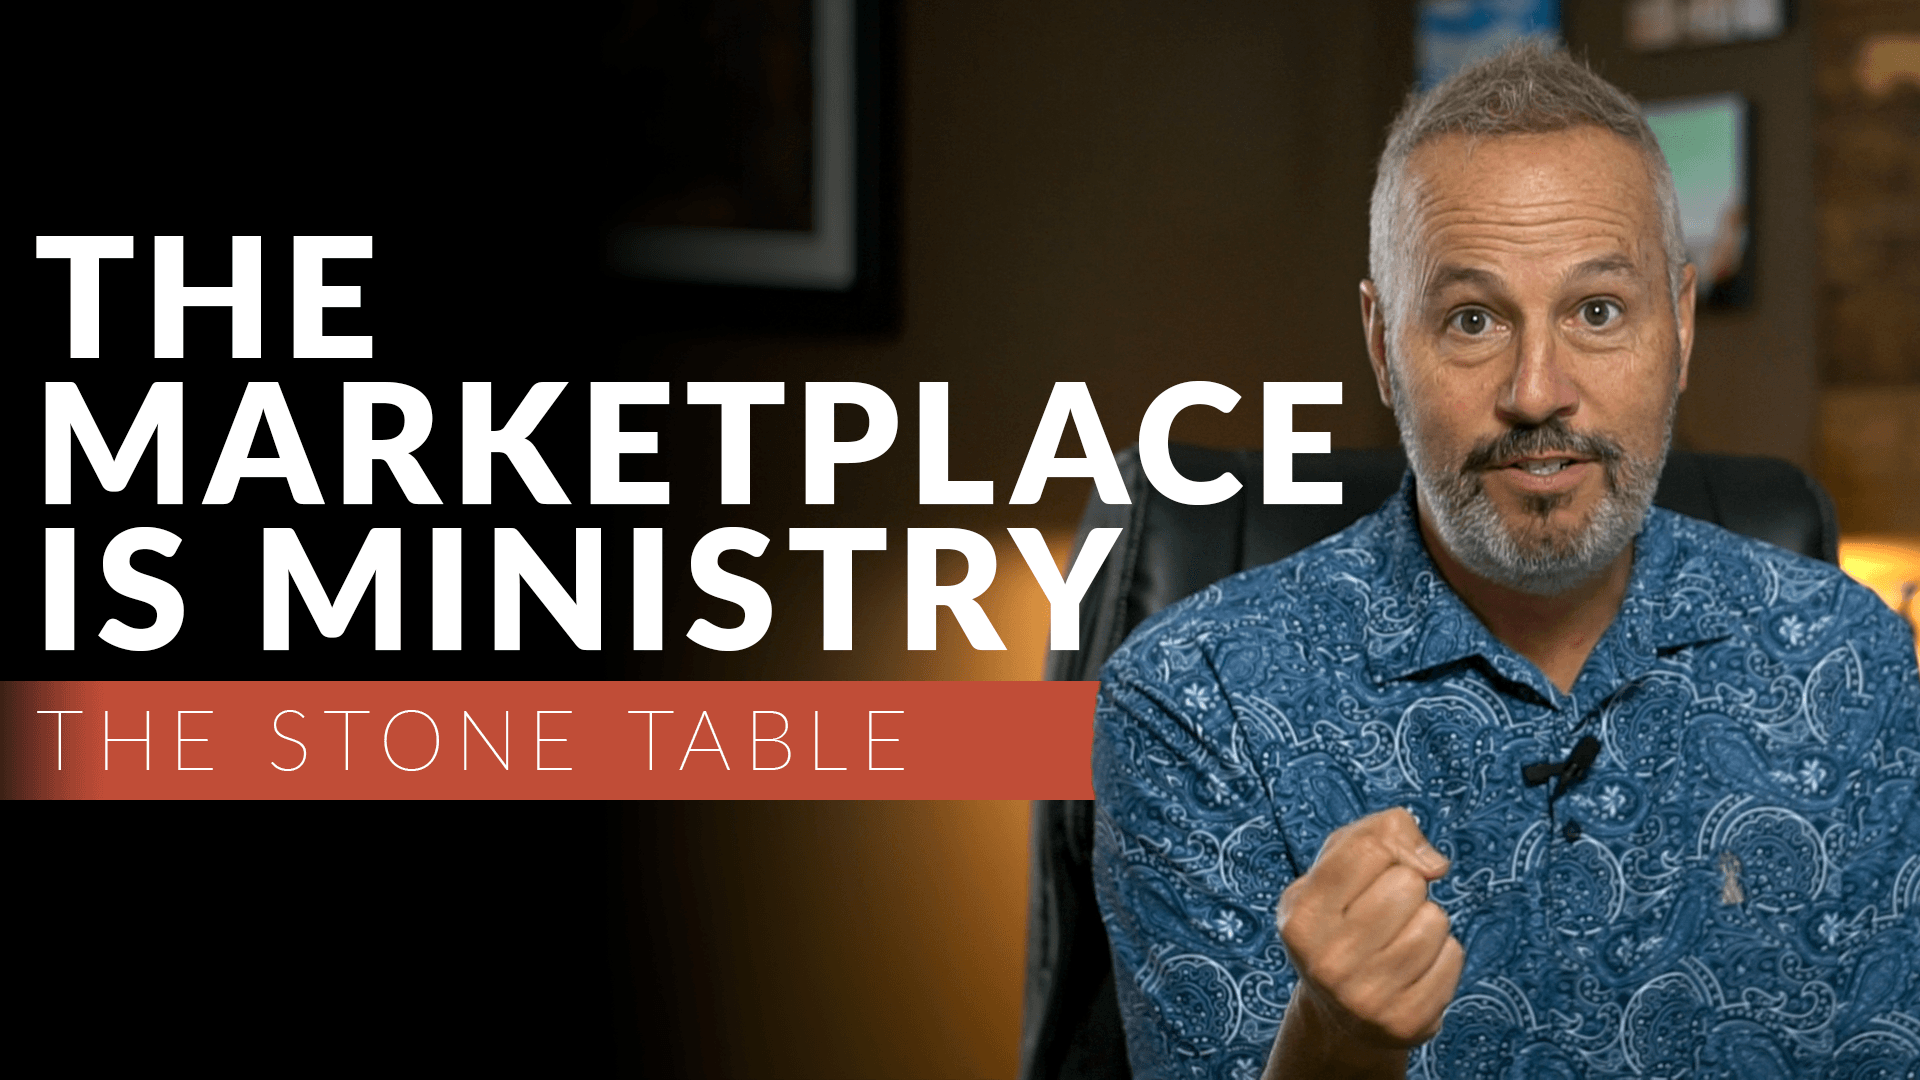 Rob Ketterling: The Marketplace is Ministry